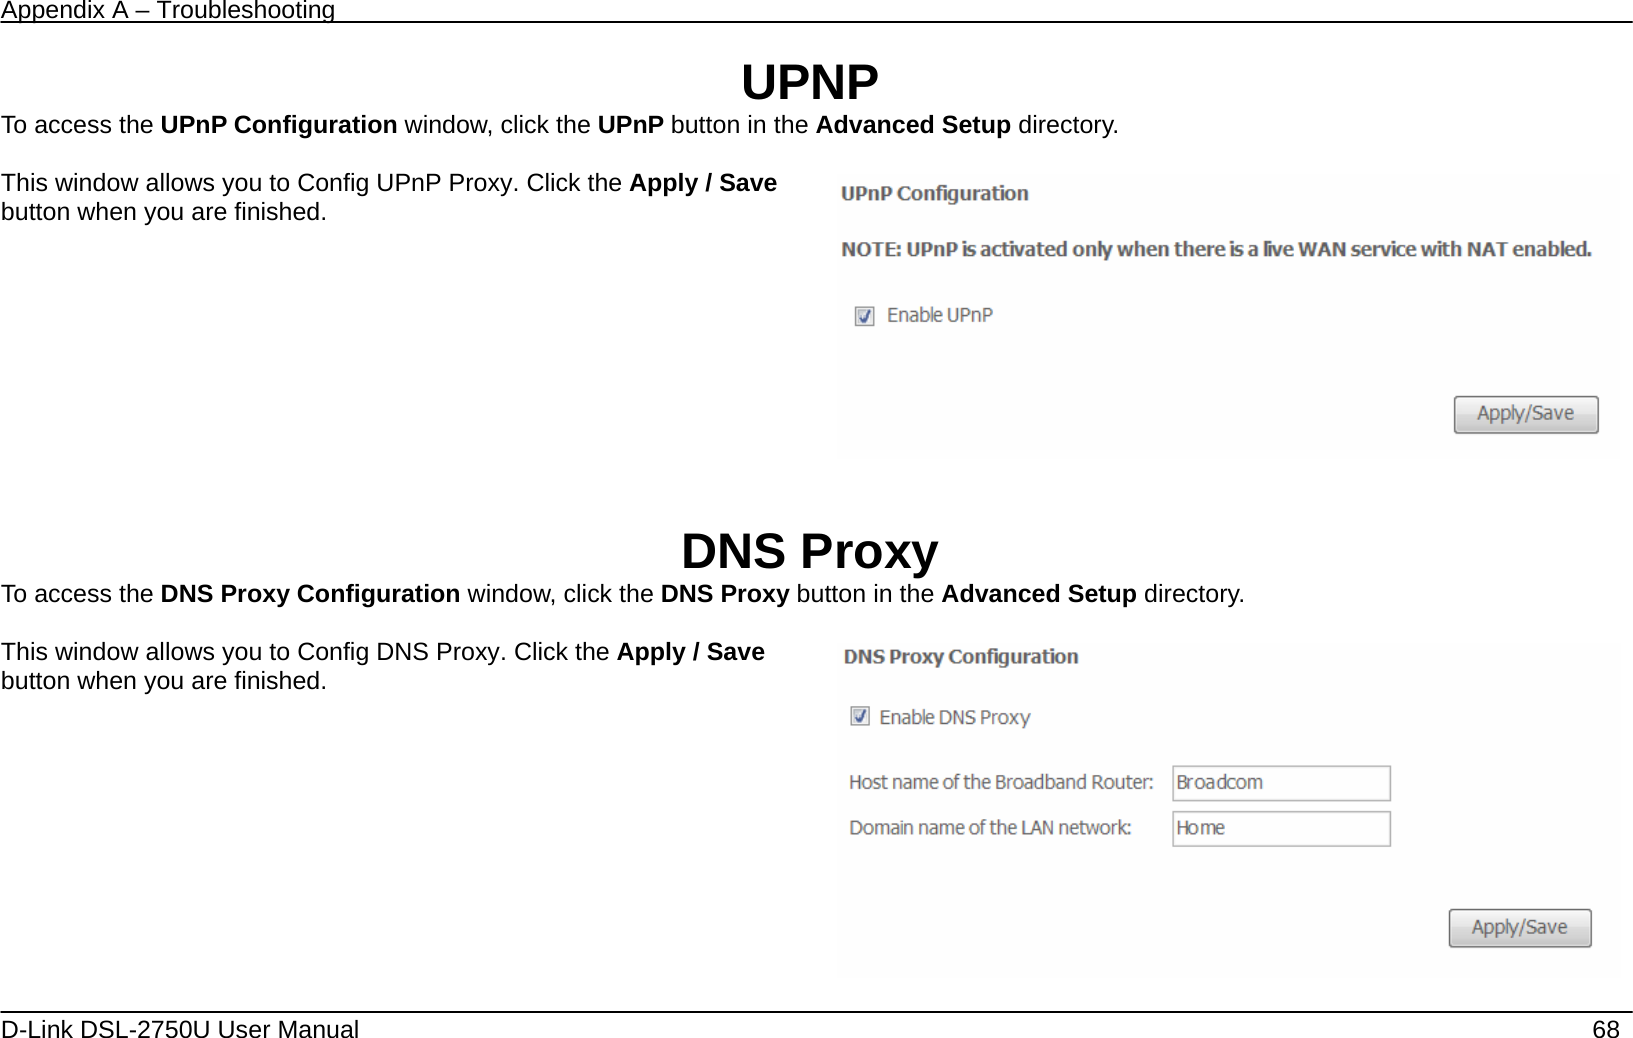 Appendix A – Troubleshooting   D-Link DSL-2750U User Manual    68 UPNP To access the UPnP Configuration window, click the UPnP button in the Advanced Setup directory.  This window allows you to Config UPnP Proxy. Click the Apply / Save button when you are finished.       DNS Proxy To access the DNS Proxy Configuration window, click the DNS Proxy button in the Advanced Setup directory.  This window allows you to Config DNS Proxy. Click the Apply / Save button when you are finished.      